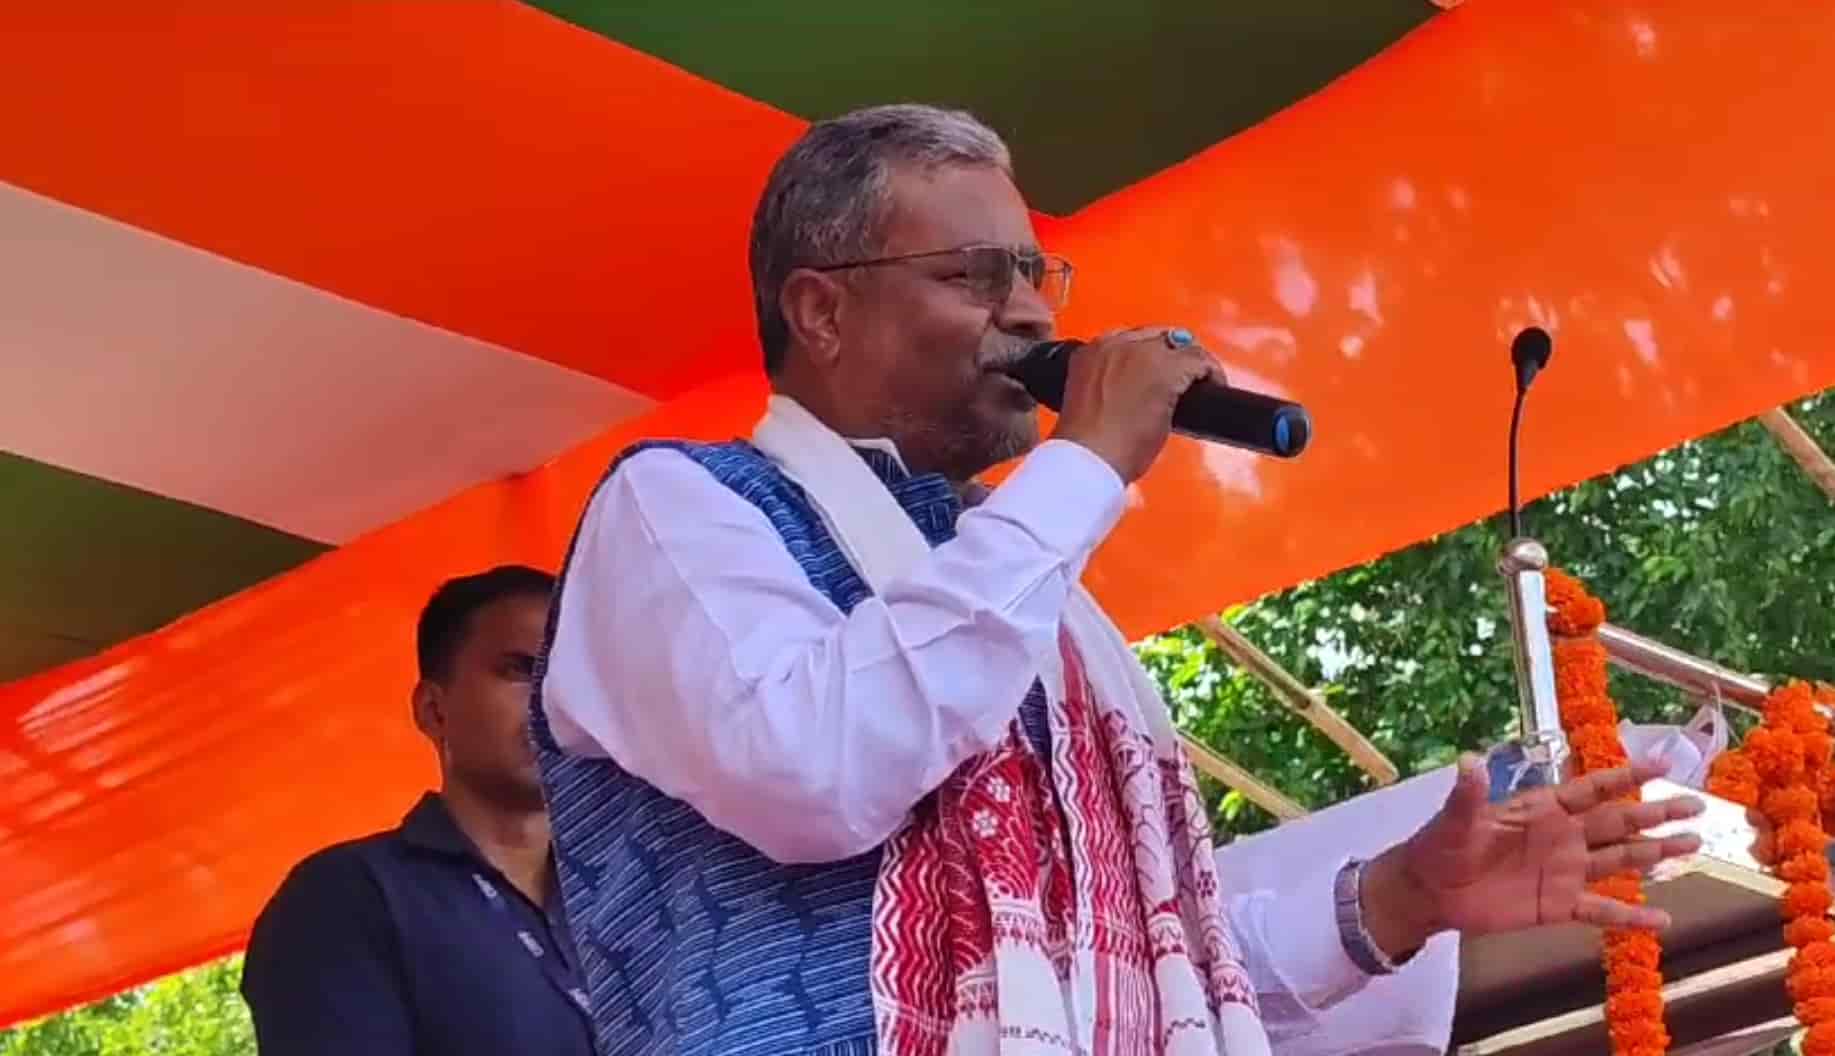 On the second day of Sankalp Yatra, BJP State President Babulal Marandi accuses Jharkhand Chief Minister Hemant Soren of corruption and misappropriation, calling for the ousting of his government for state development.